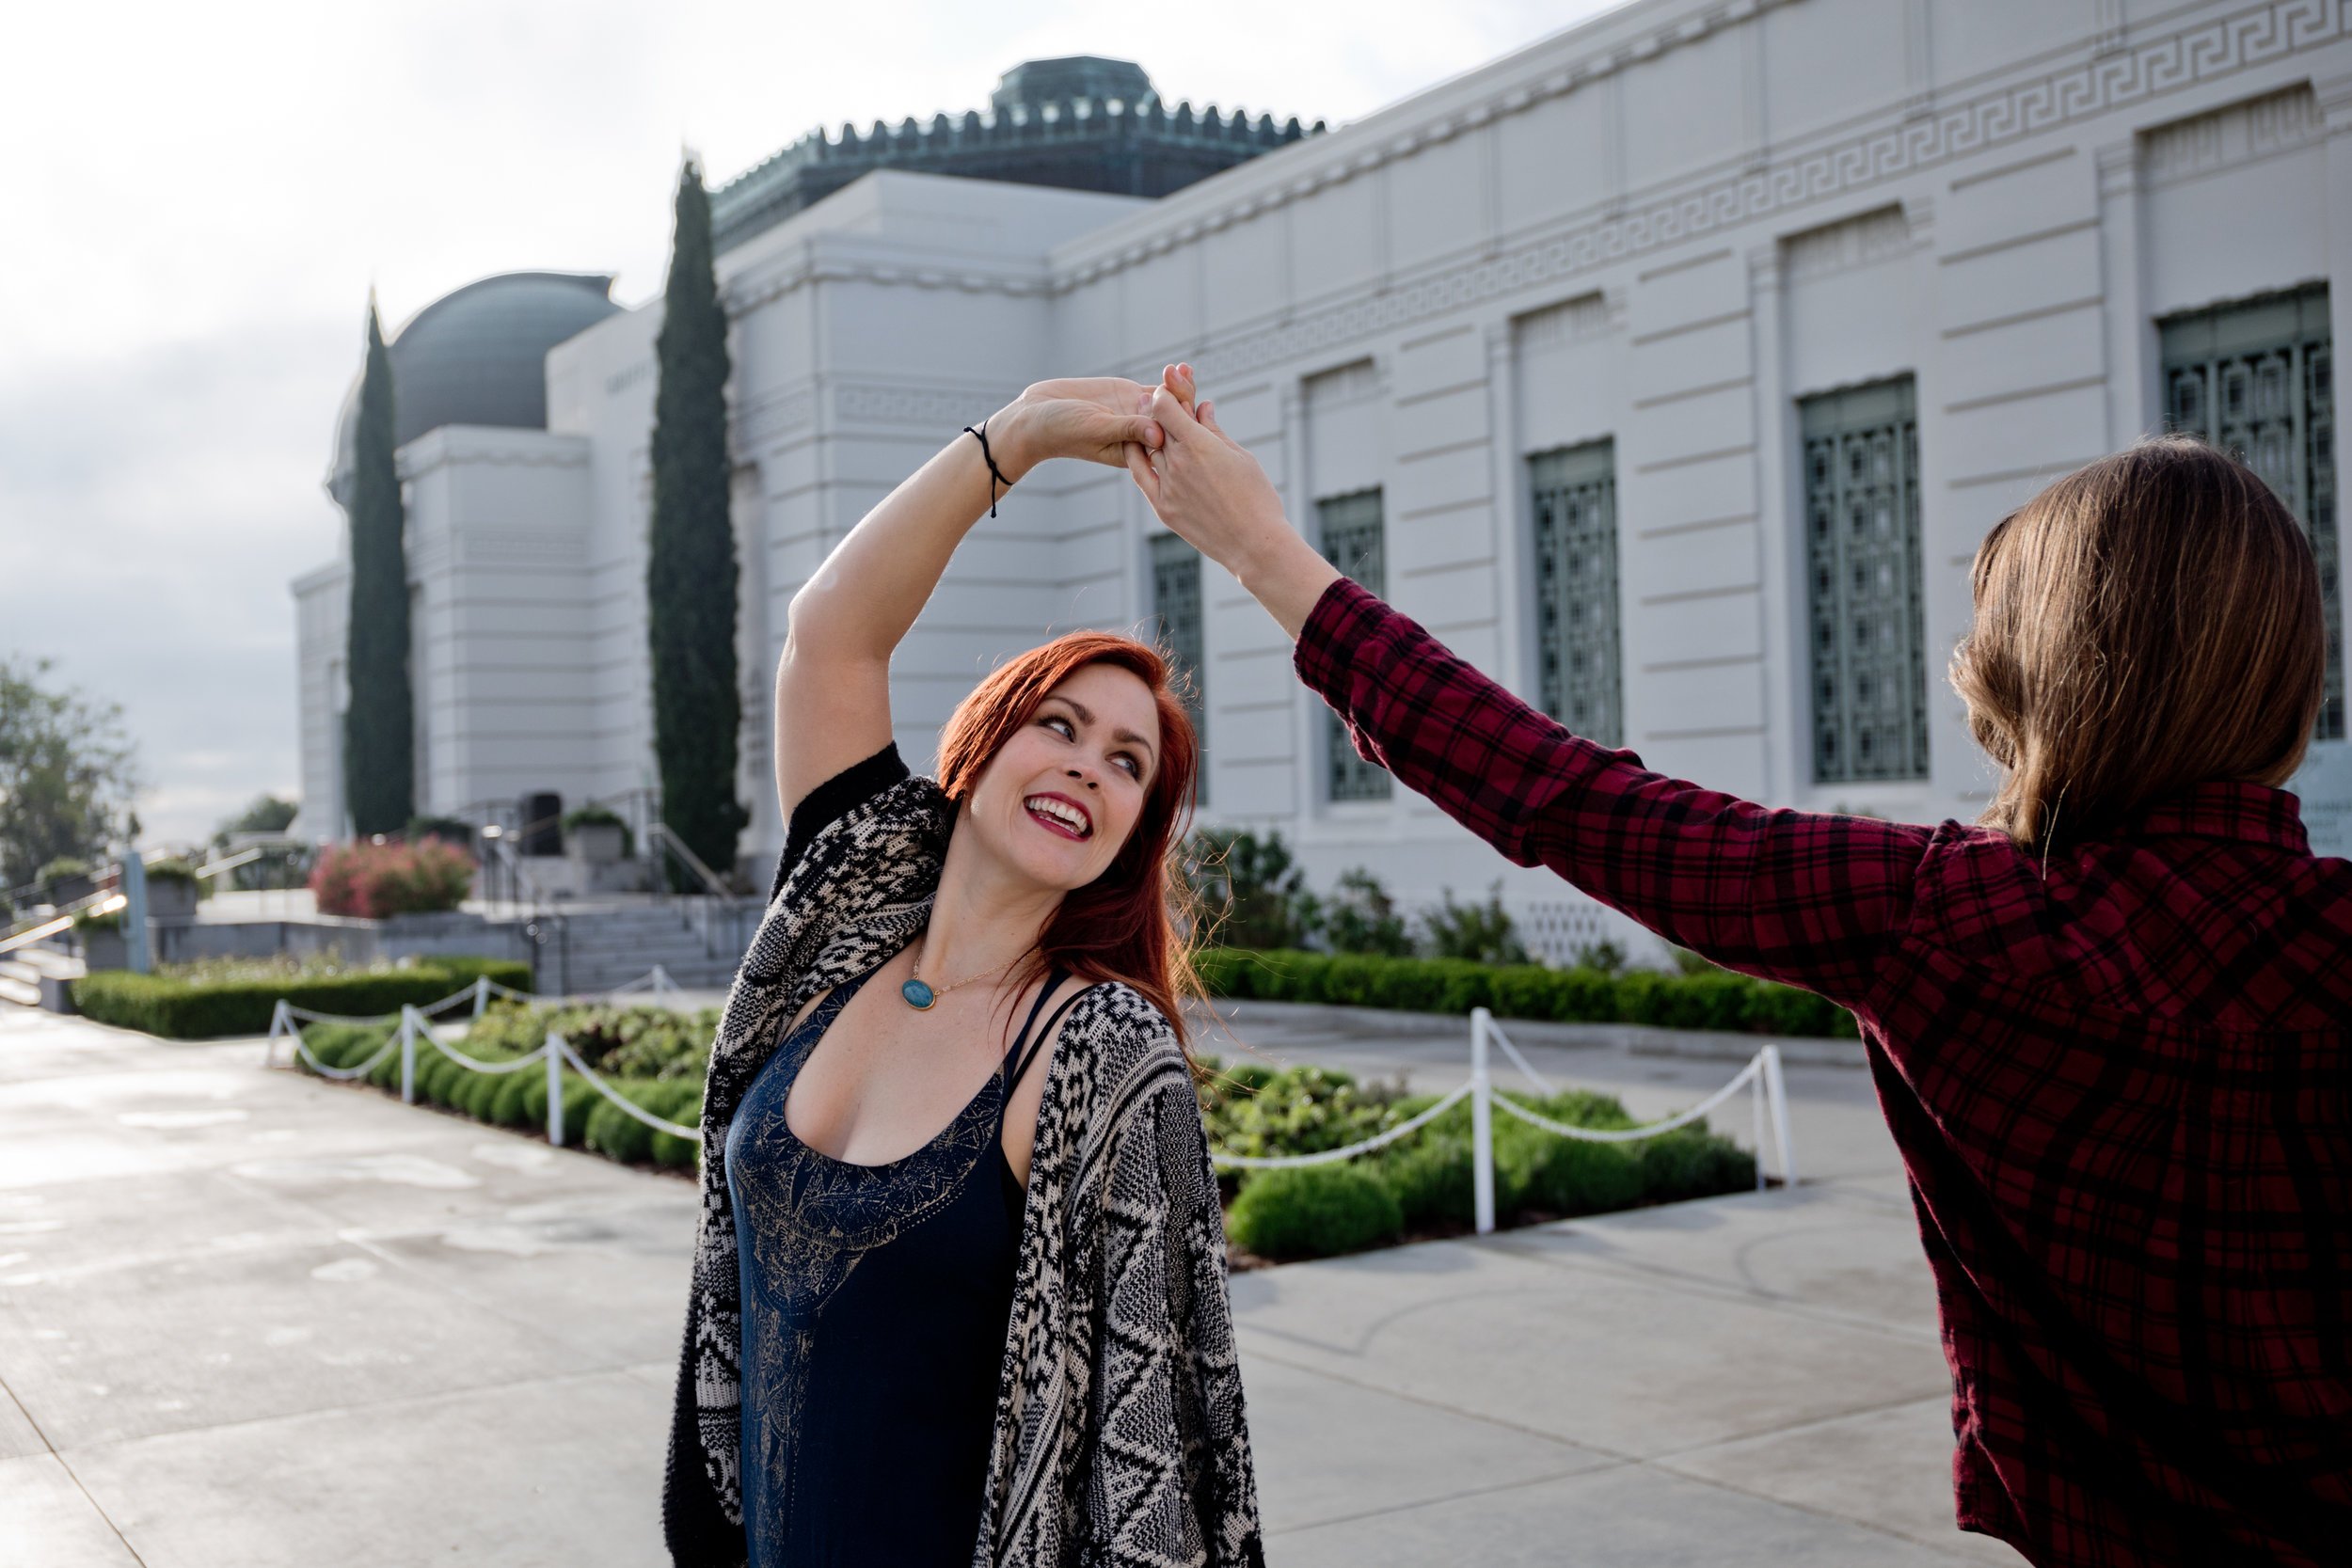 Courtney &amp; Tierney dancing in front of the Griffith Observatory in LA